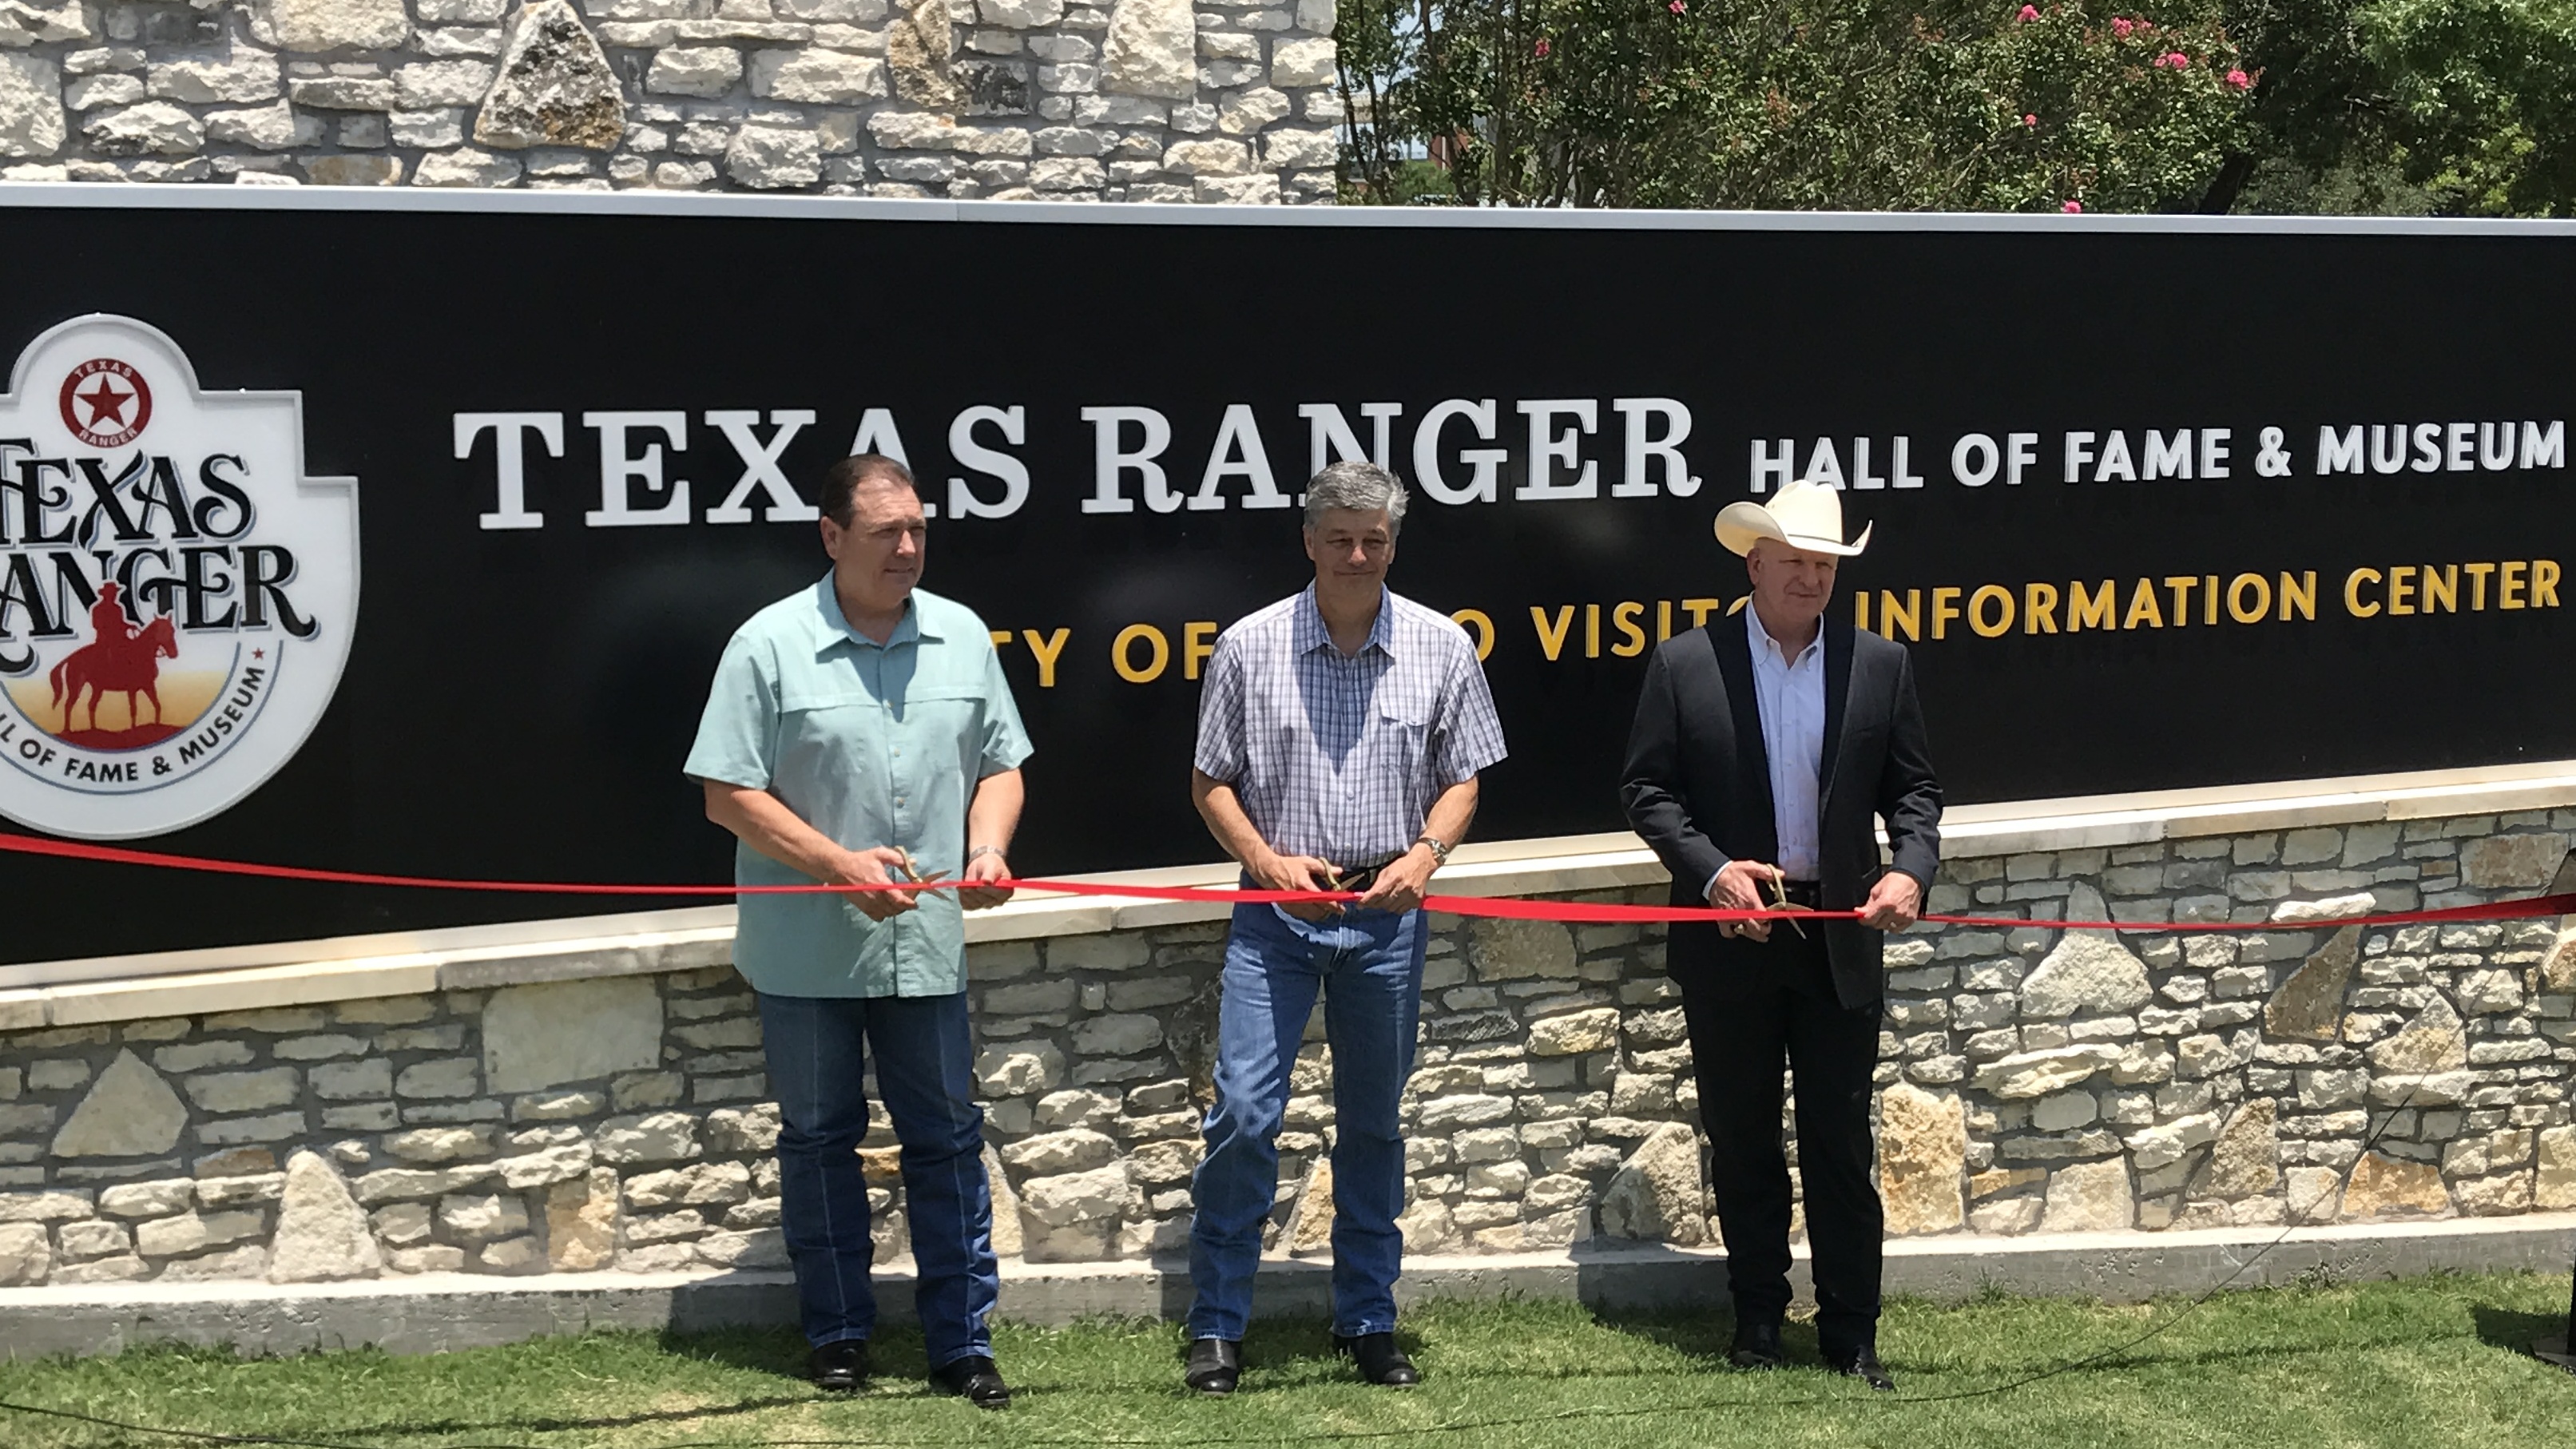 The Official Texas Ranger Hall of Fame and Museum in Waco, Texas